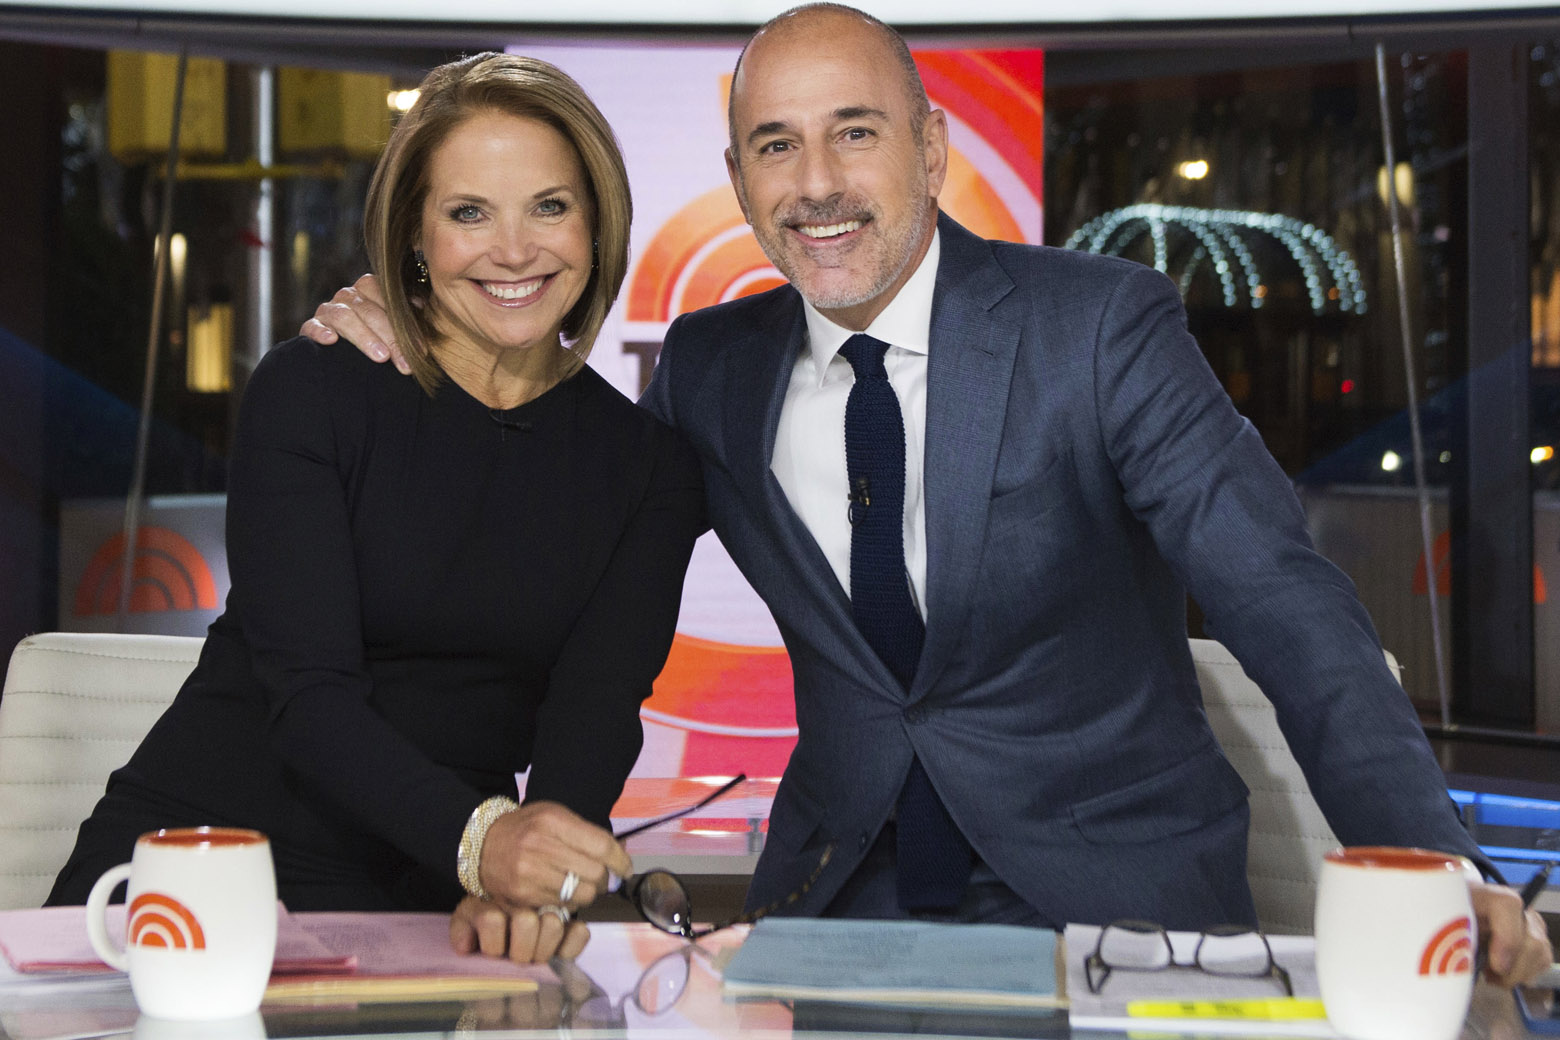 Nbcs Matt Lauer Fired For Inappropriate Sexual Behavior At Work Wtop News 6893